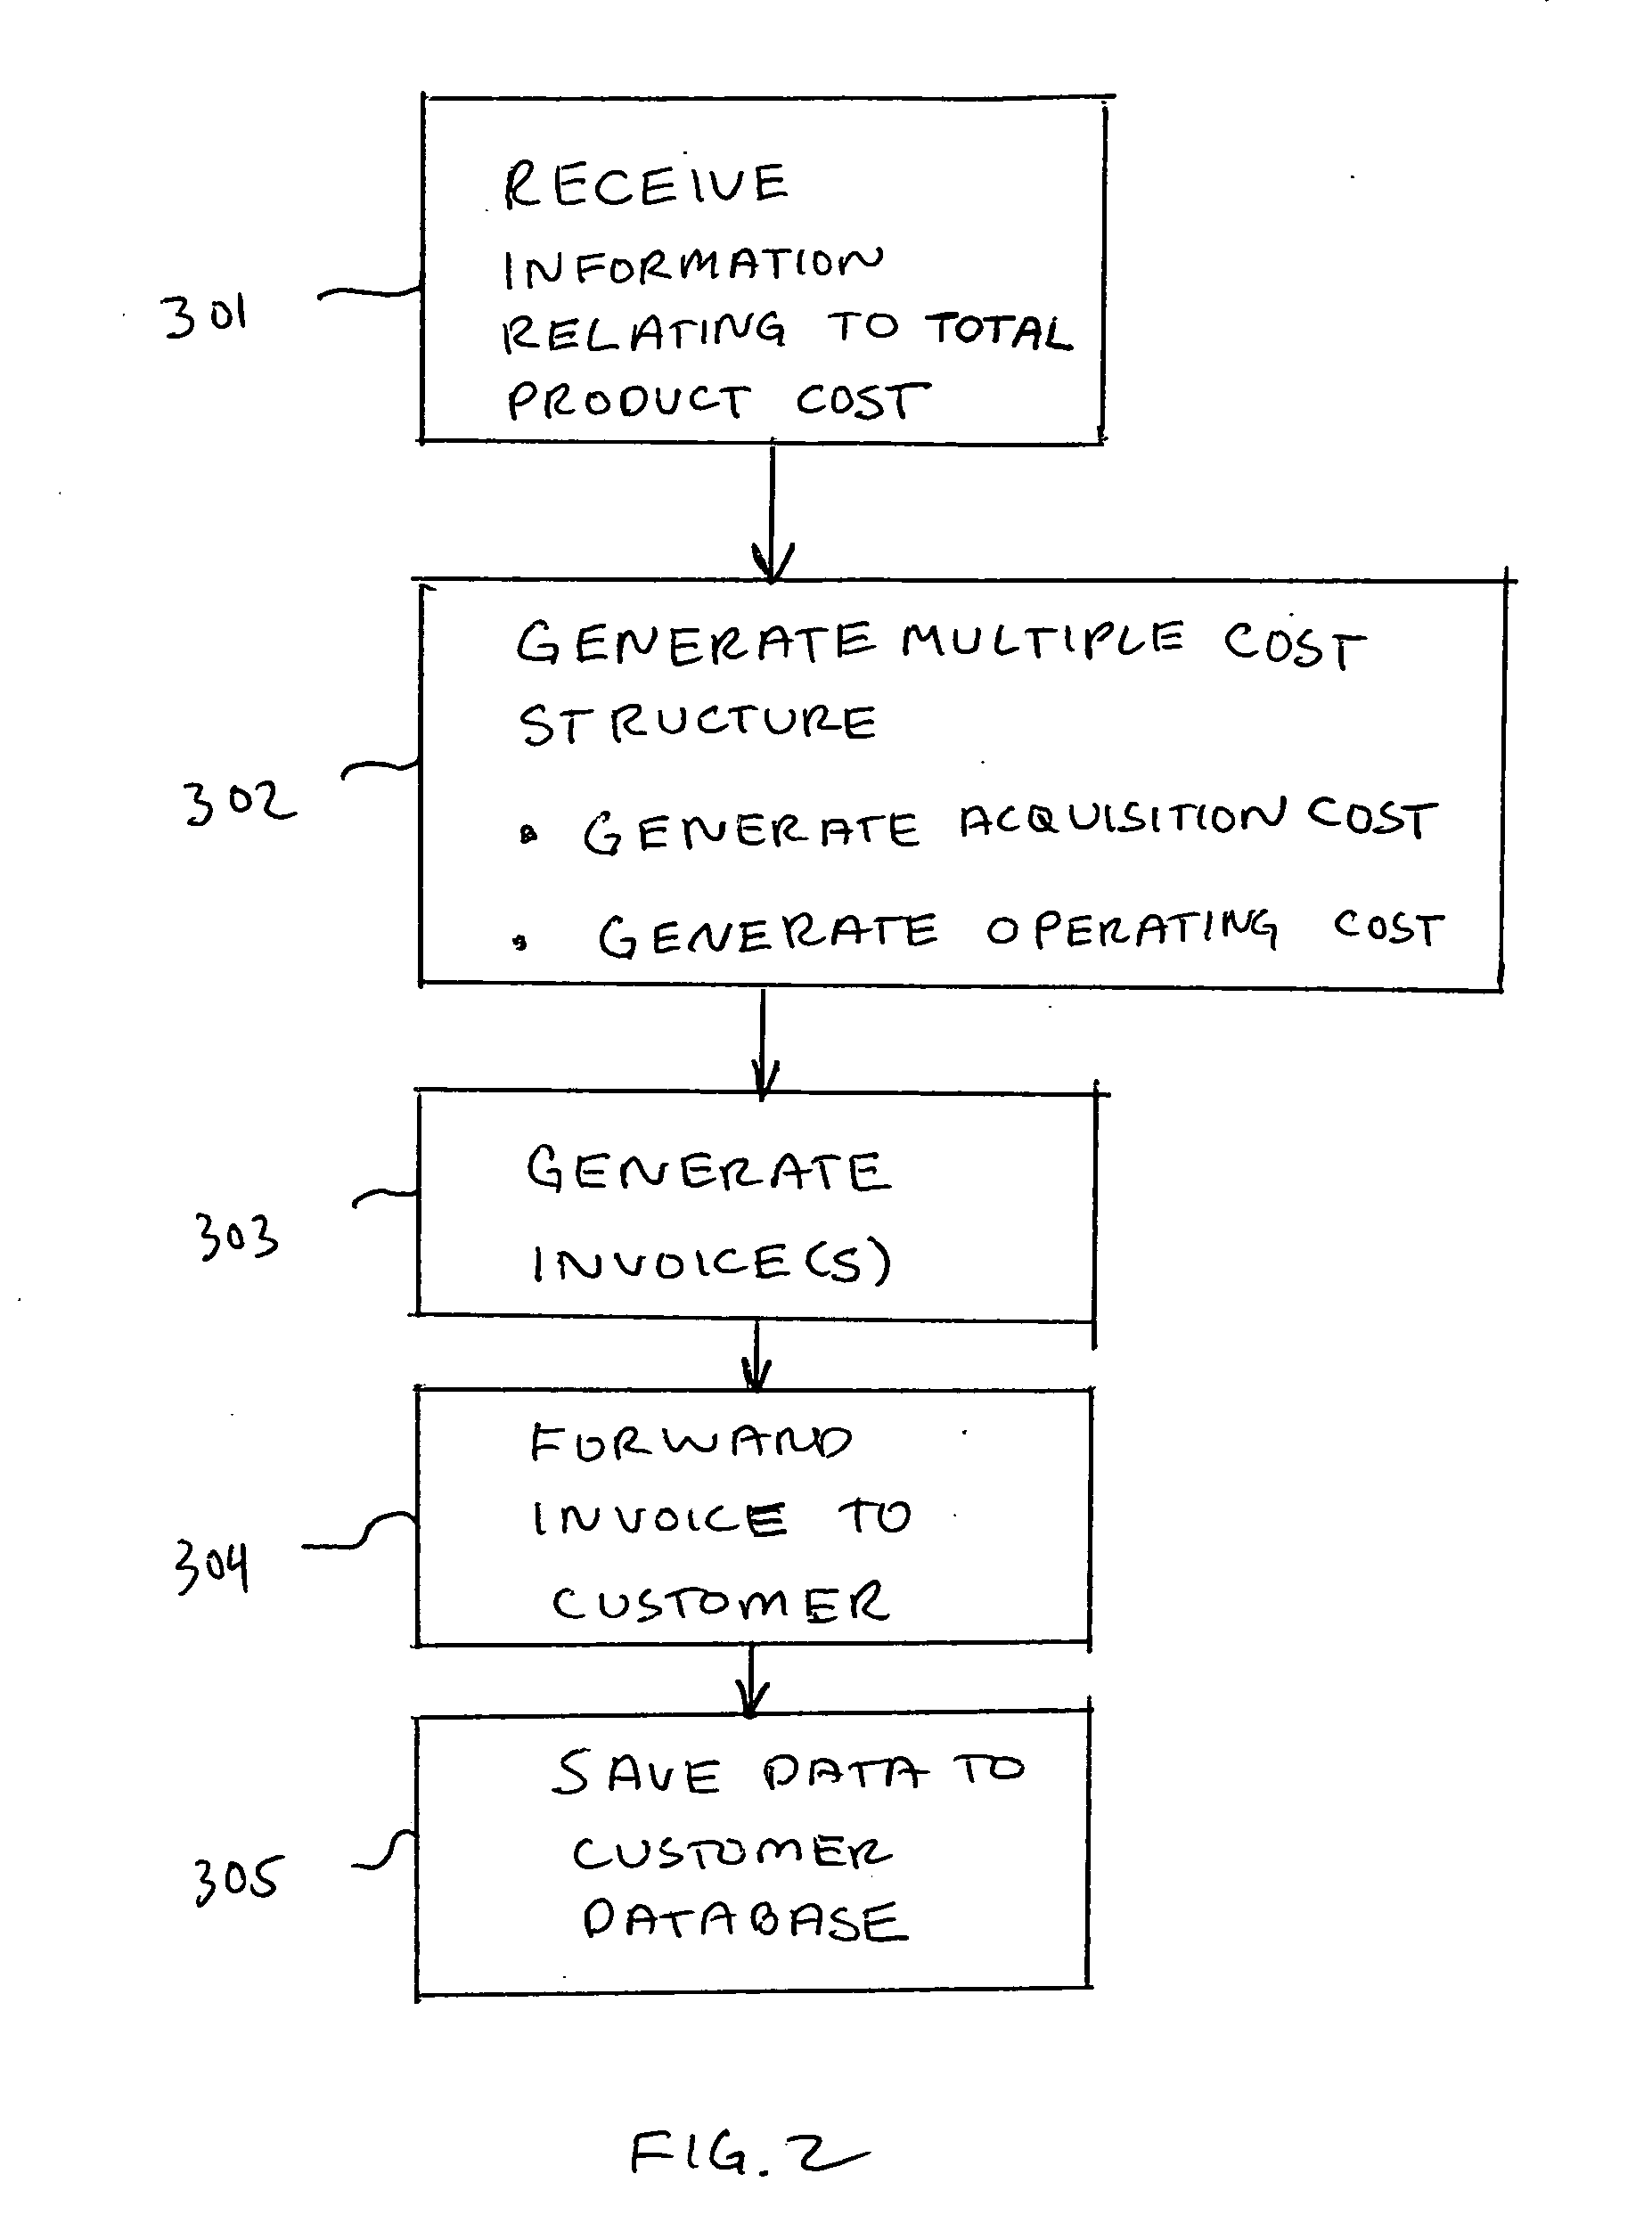 System and method of cost distribution and invoice management for products having time-based benefits